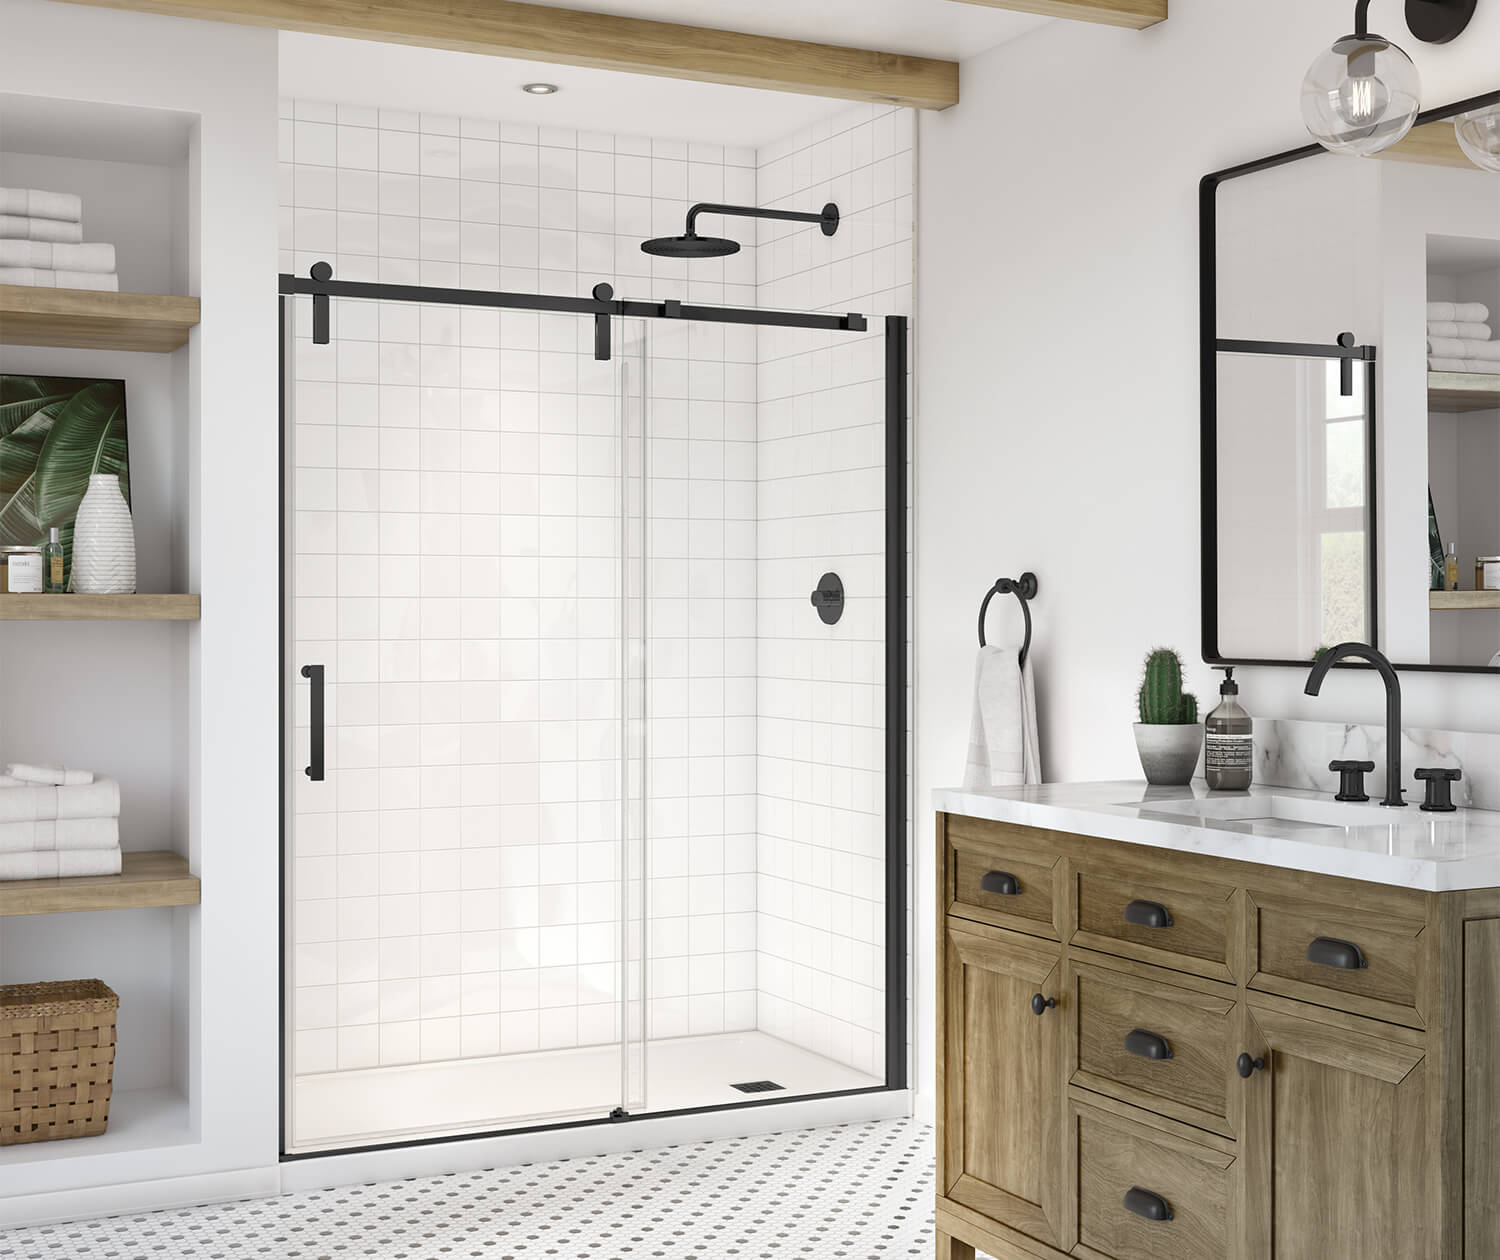 Outback 55 ¼ 58 ½ X 70 ½ In 8mm Sliding Shower Door For Alcove